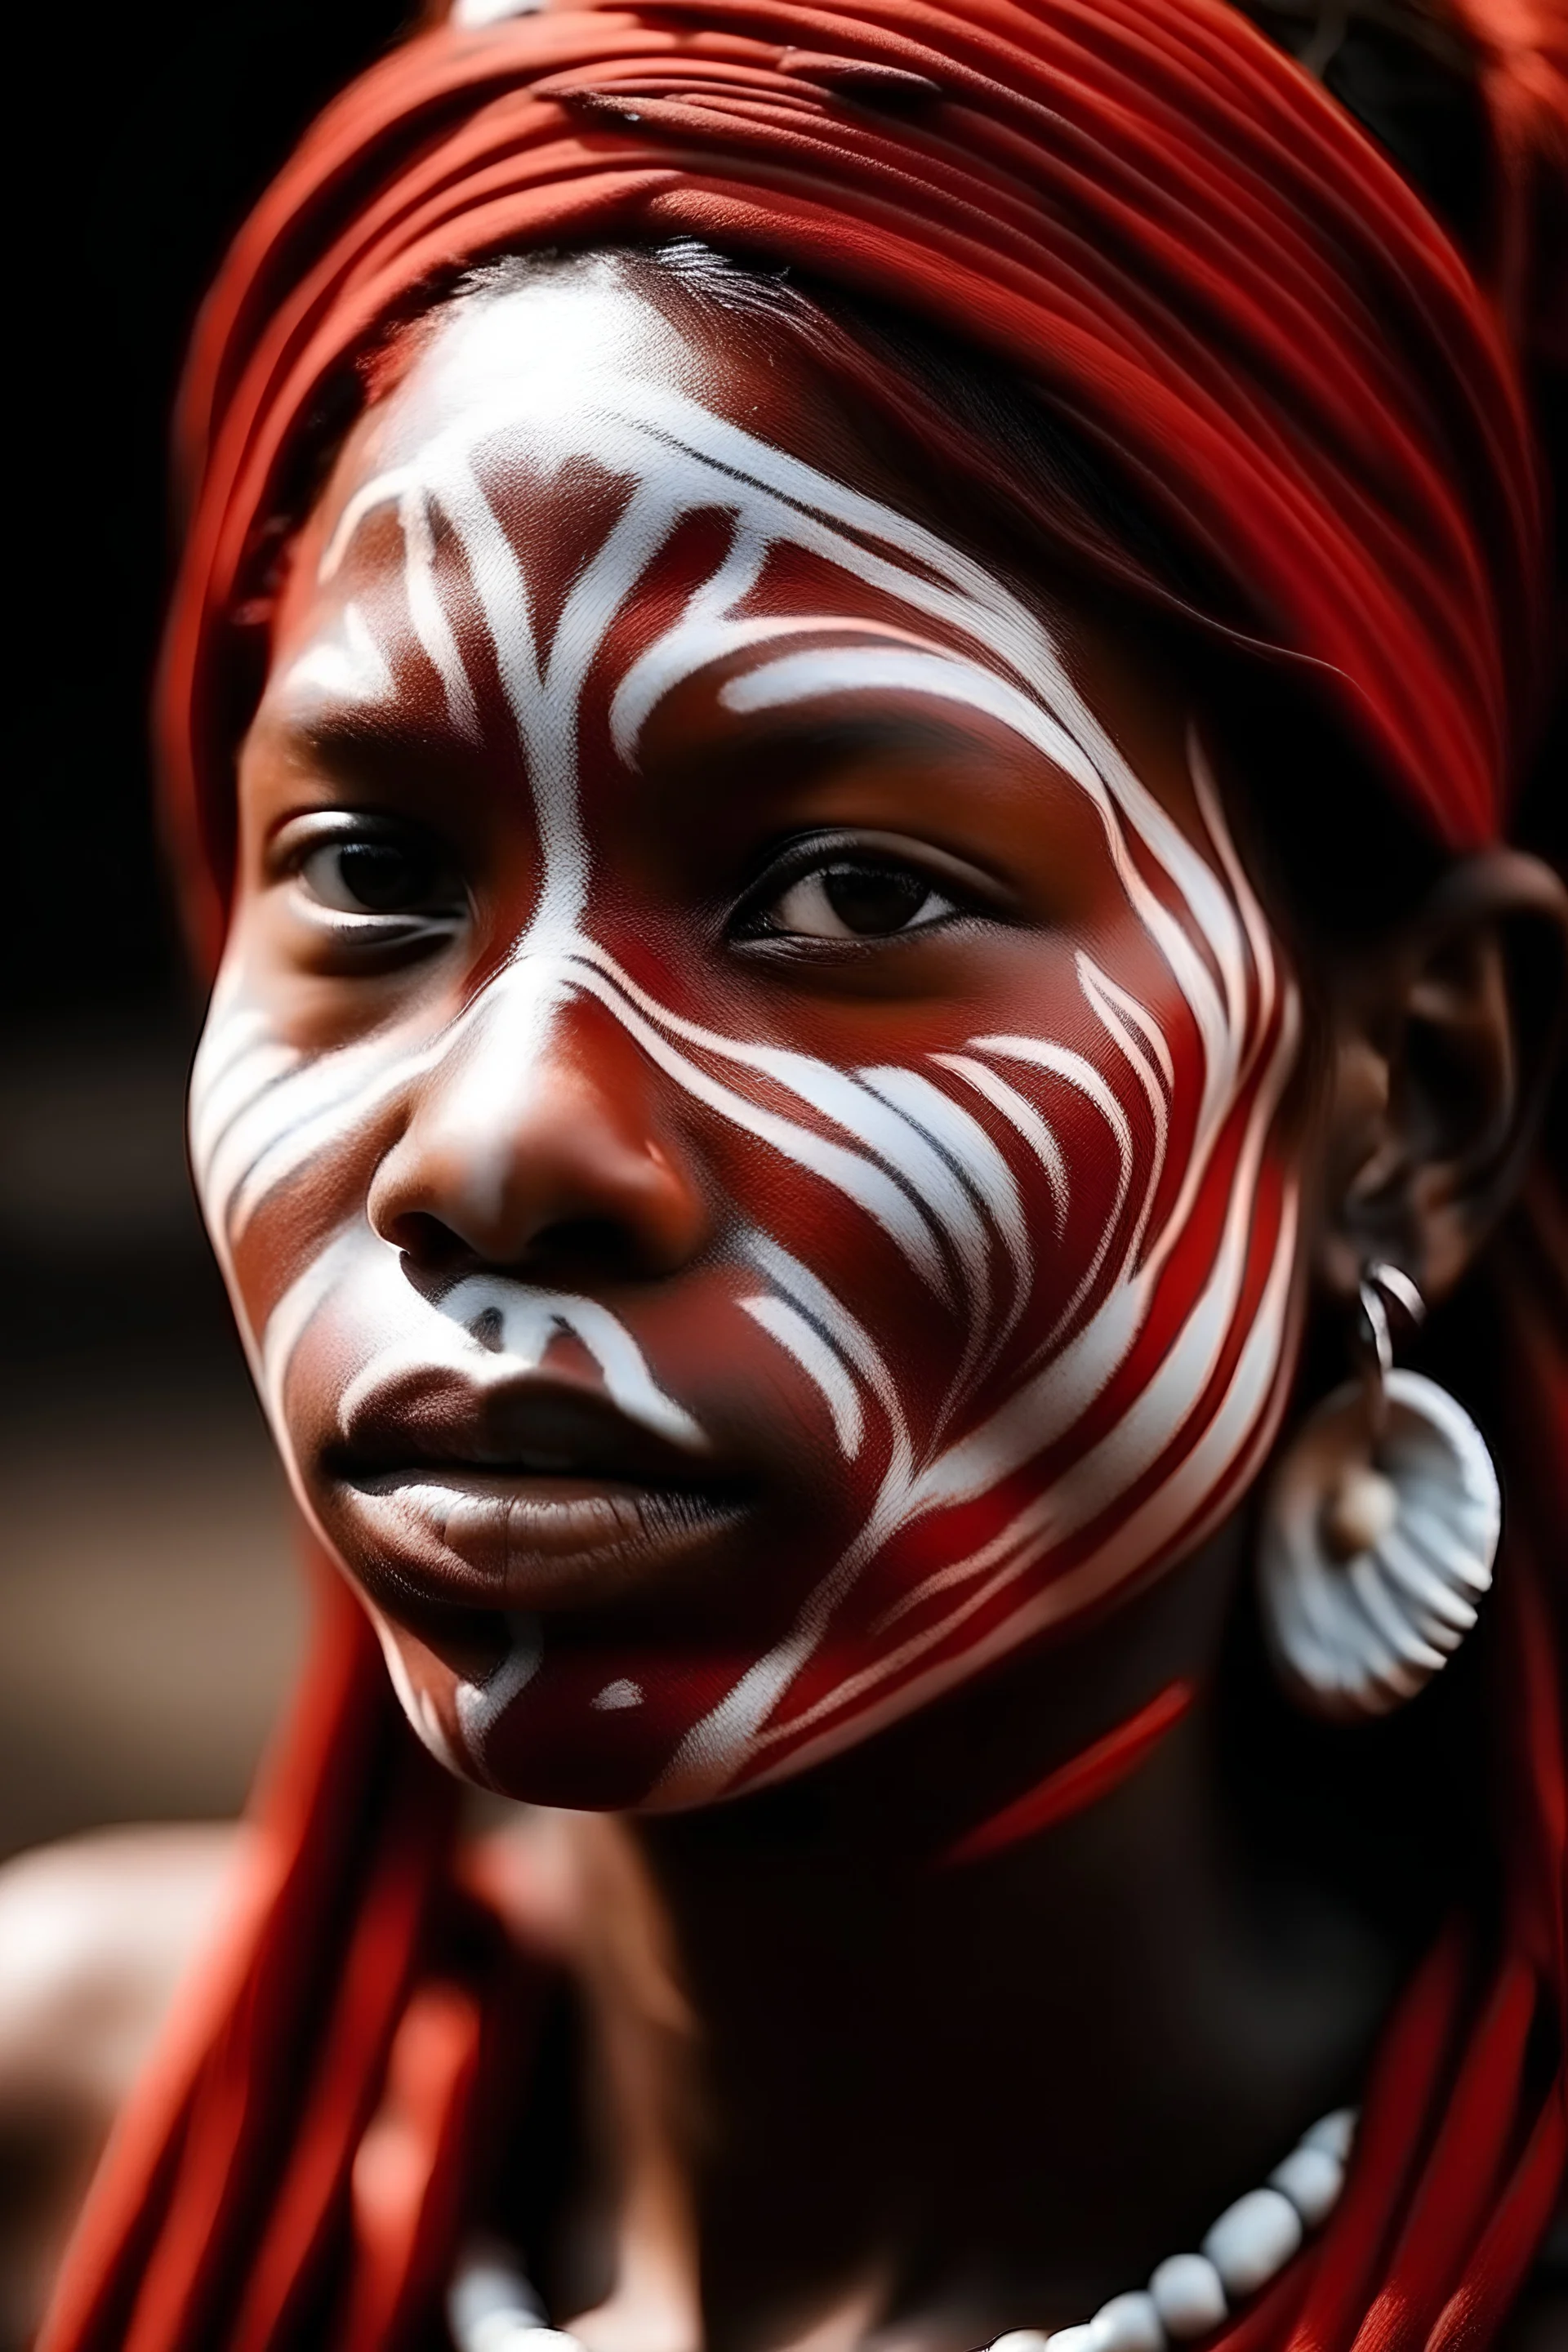 Lady with red skin and white facial markings